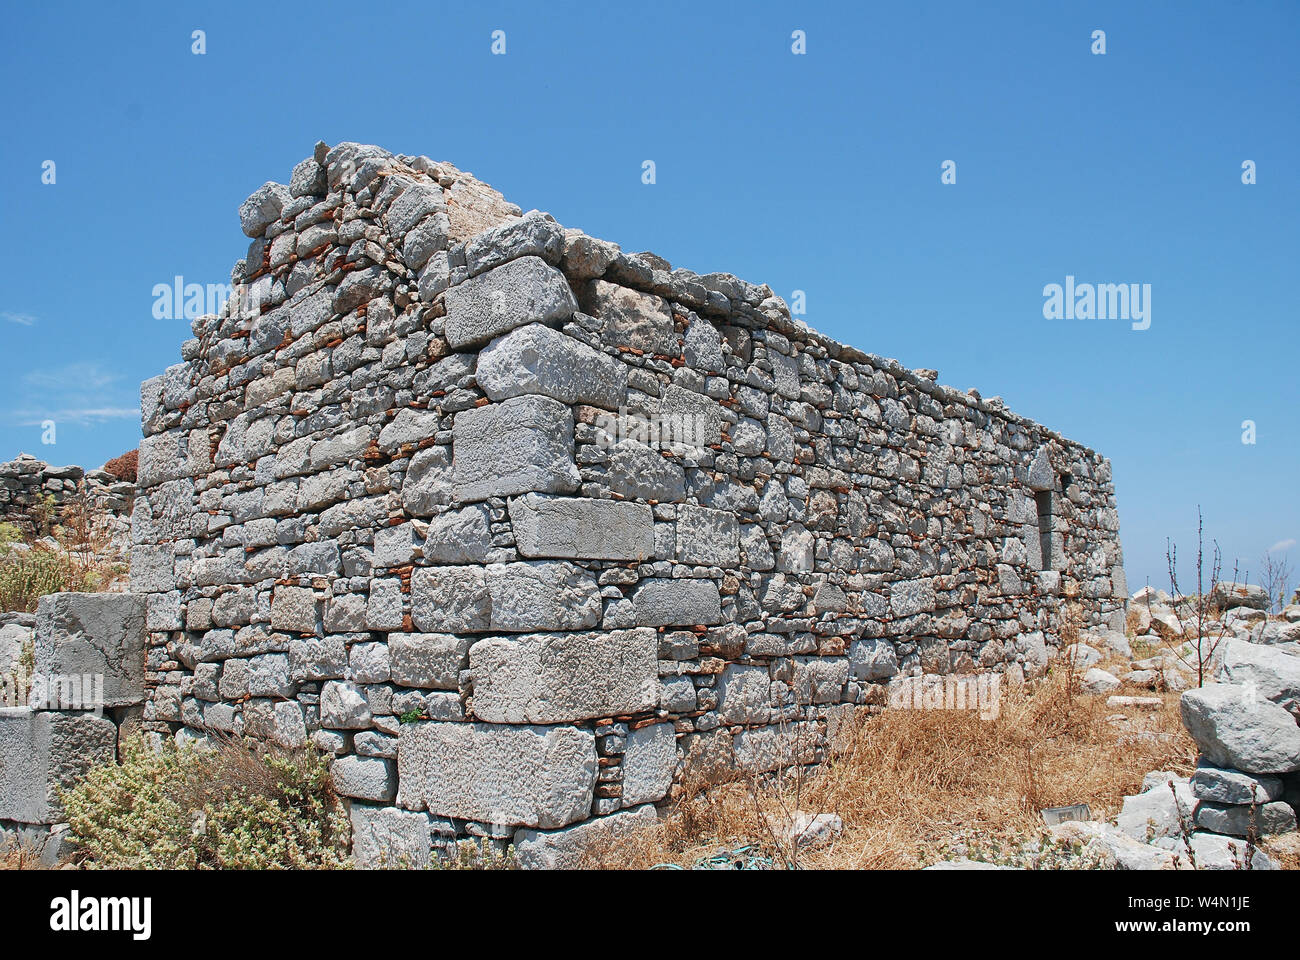 The ruins of the medieval Crusader Knights castle above Megalo Chorio on the Greek island of Tilos. Stock Photo